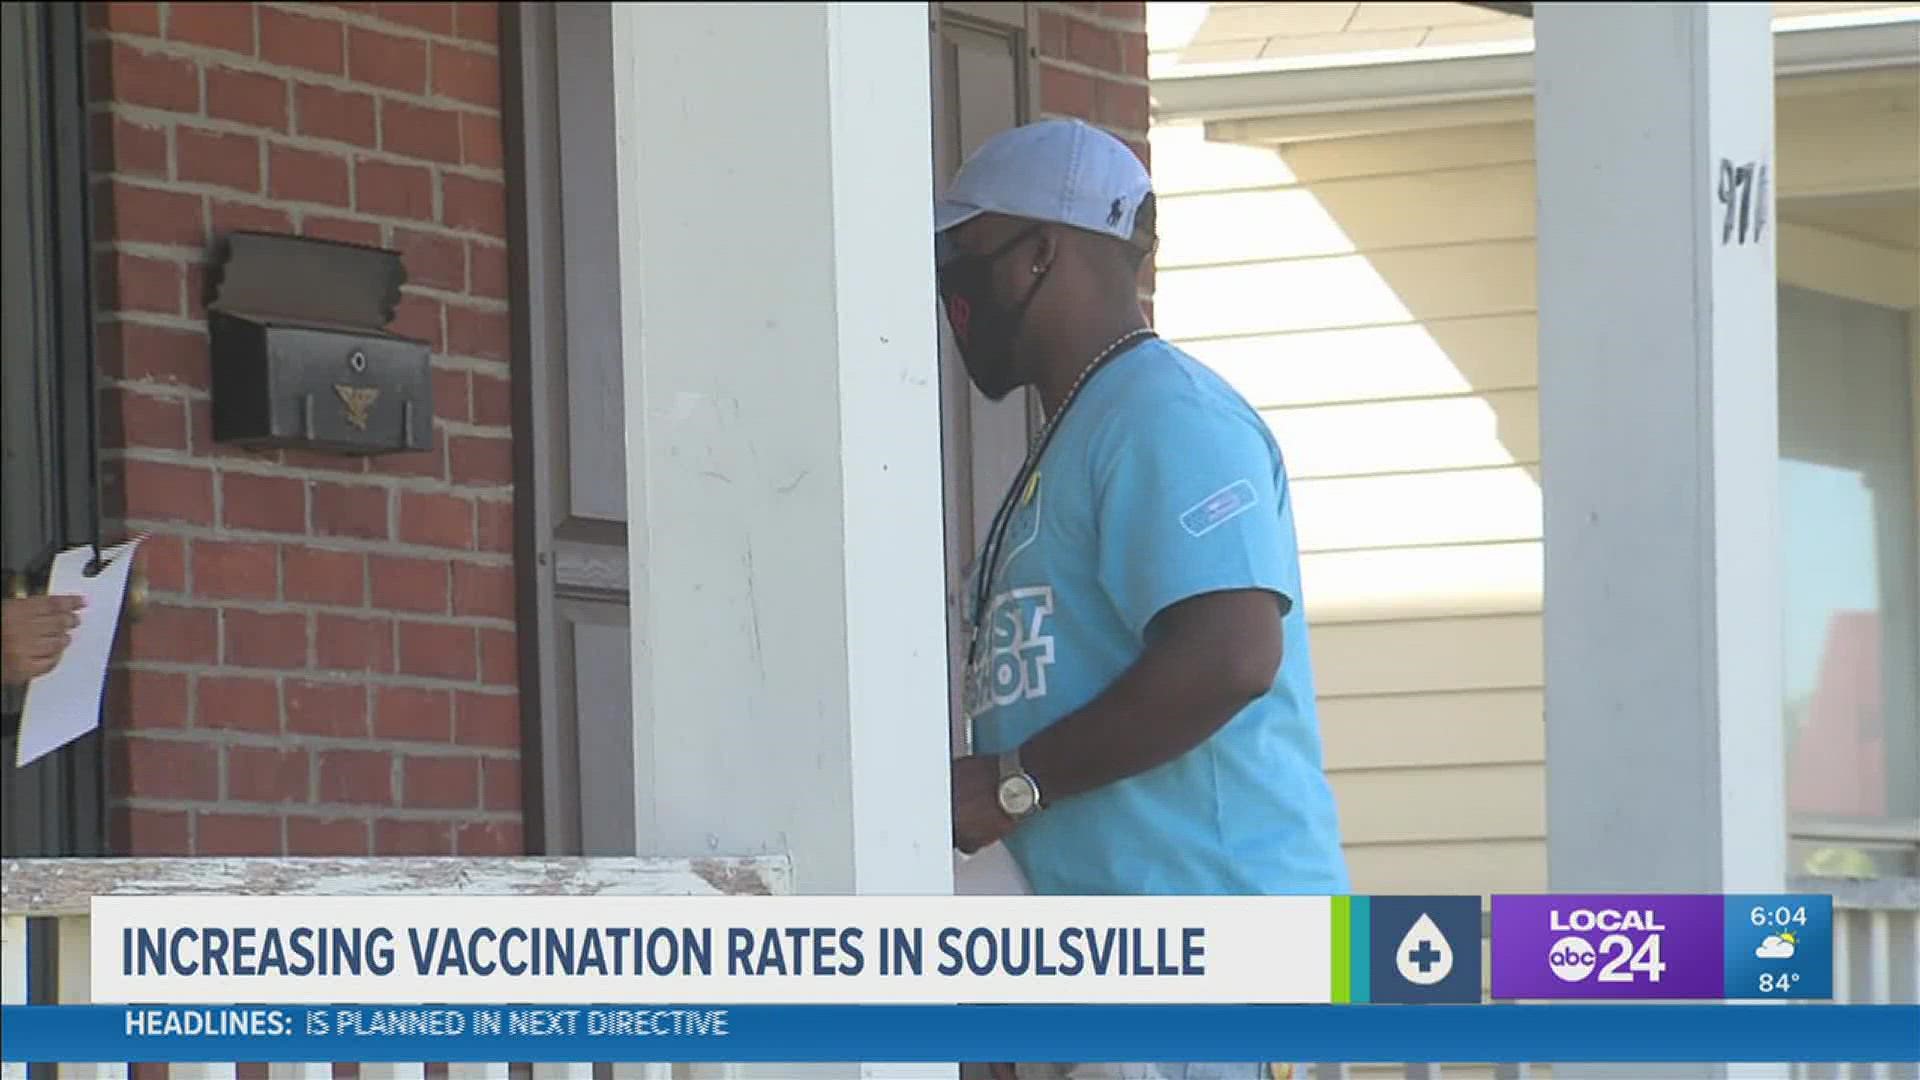 The group goes door to door to encourage COVID-19 vaccinations, especially targeting Shelby County's lowest vaccinated ZIP codes.